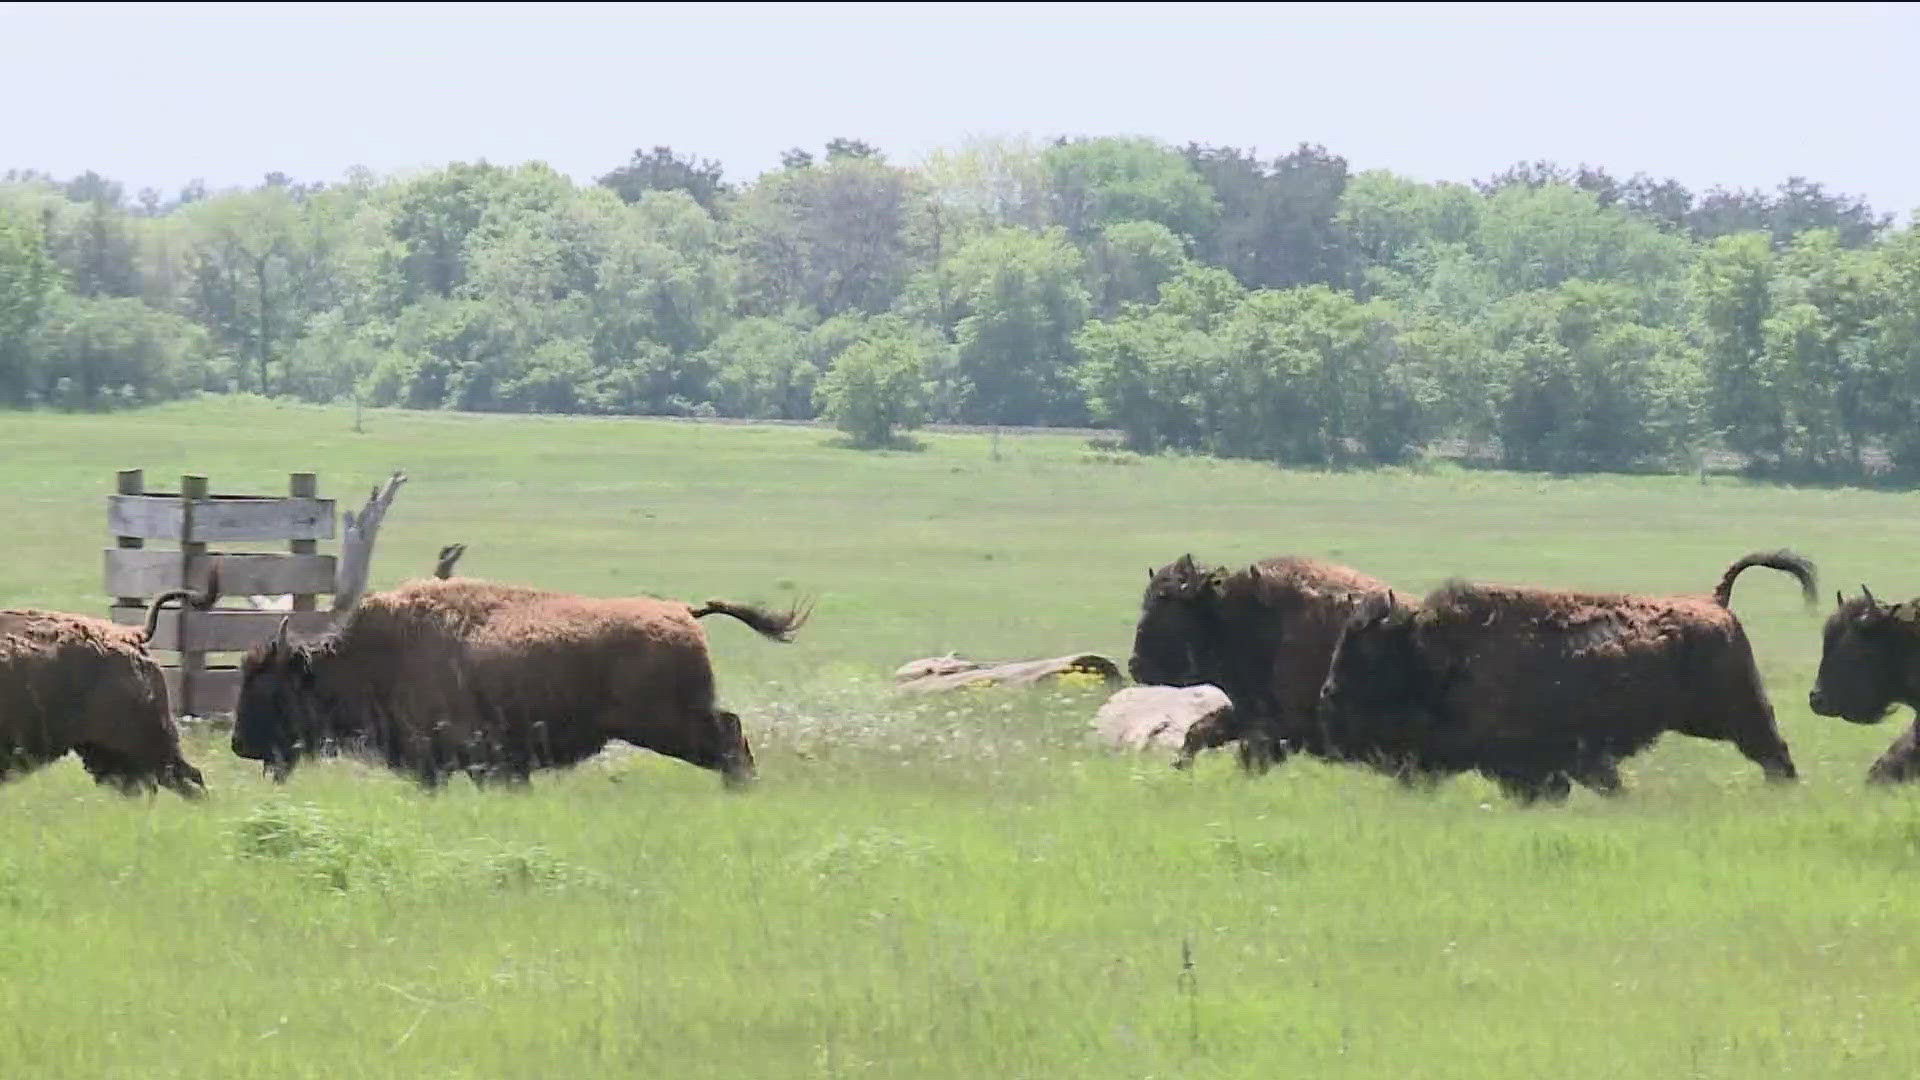 Saturday marked the annual release for the 29 bison.